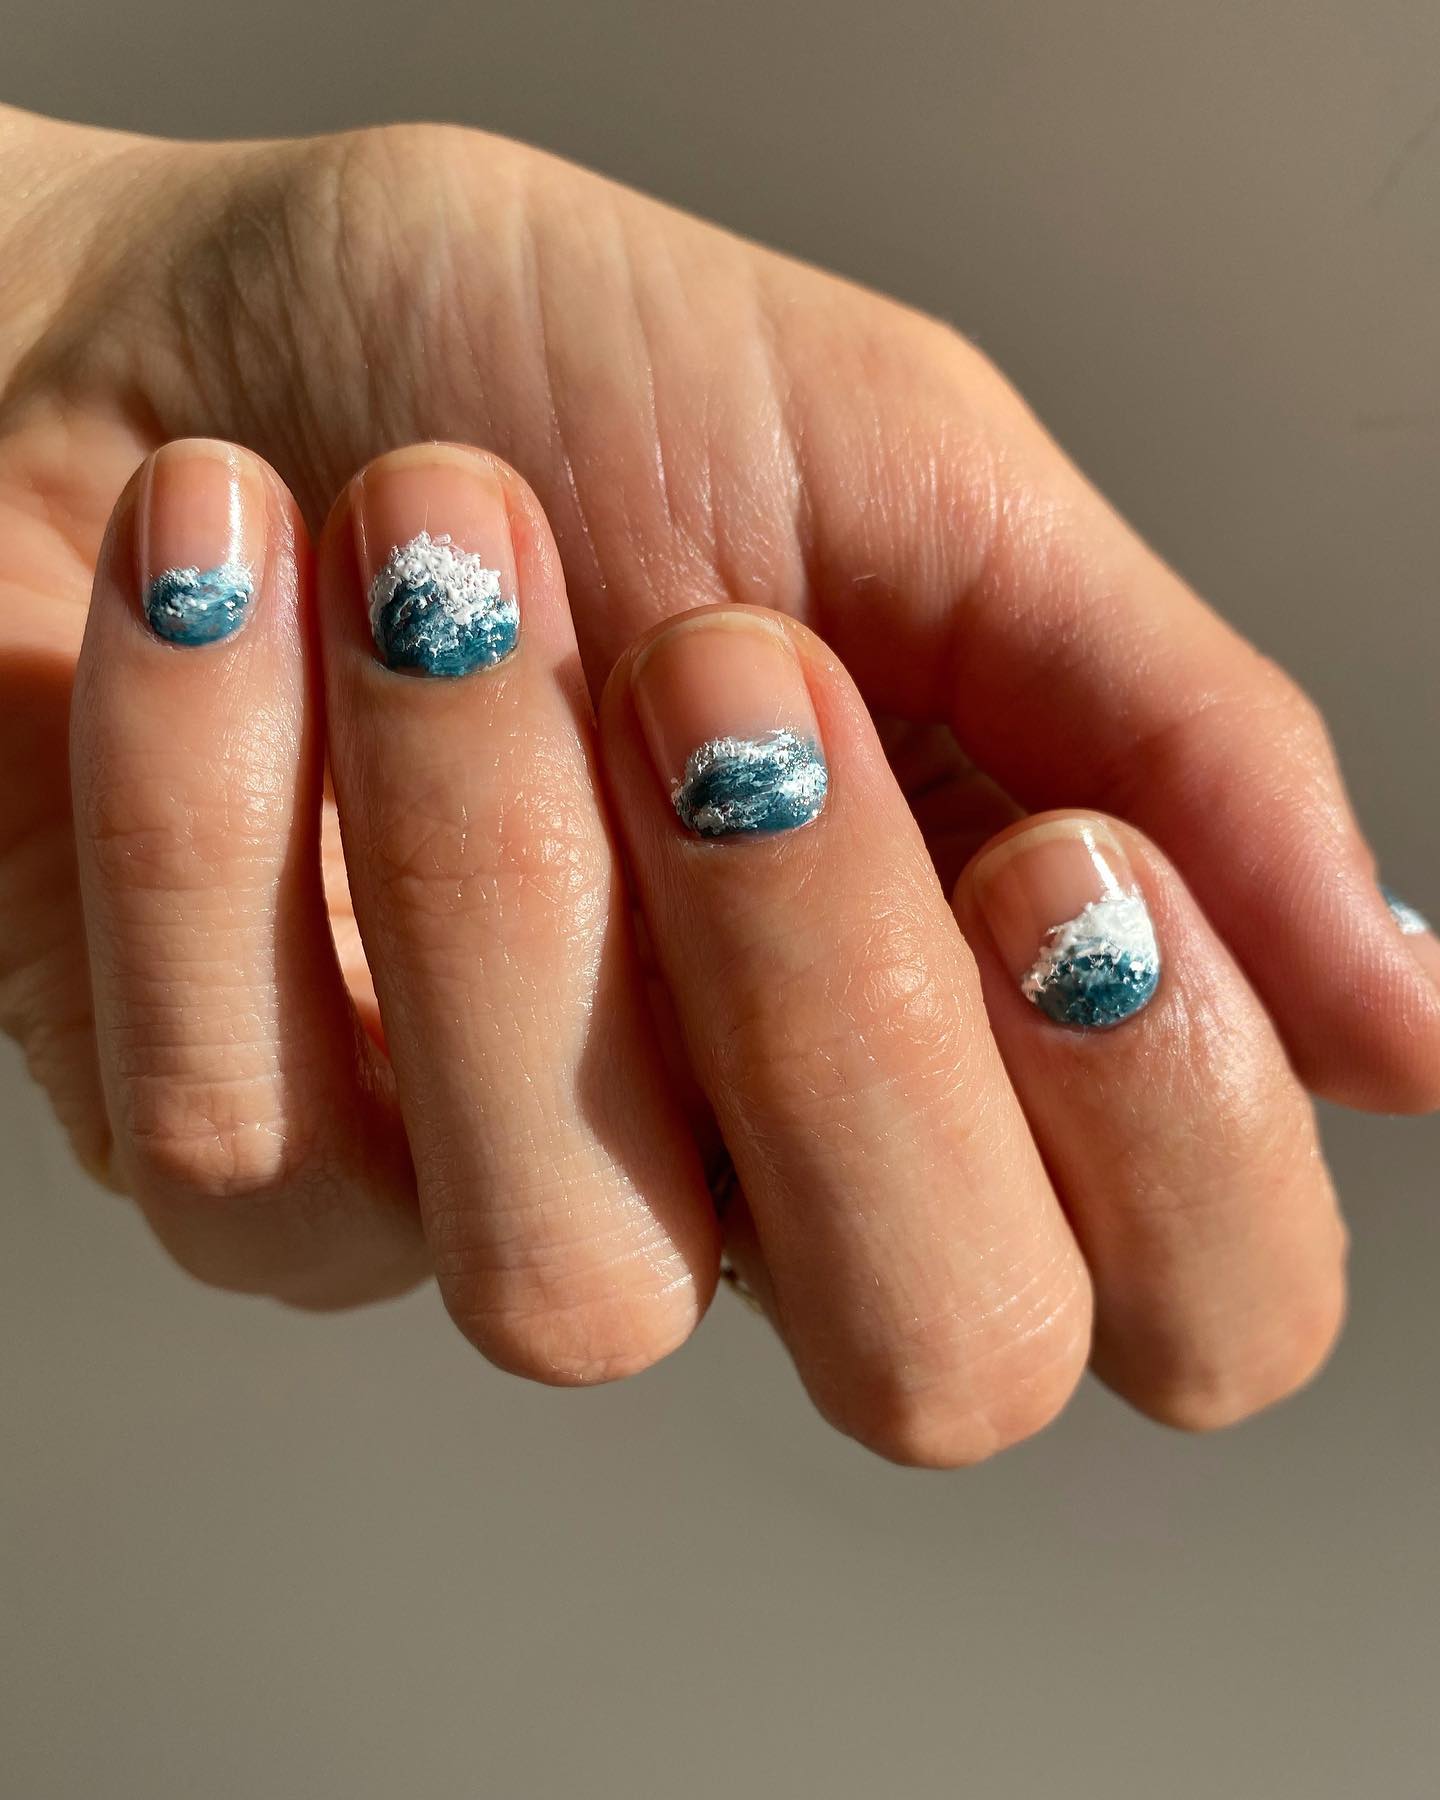 Short Clear Nails with Waves